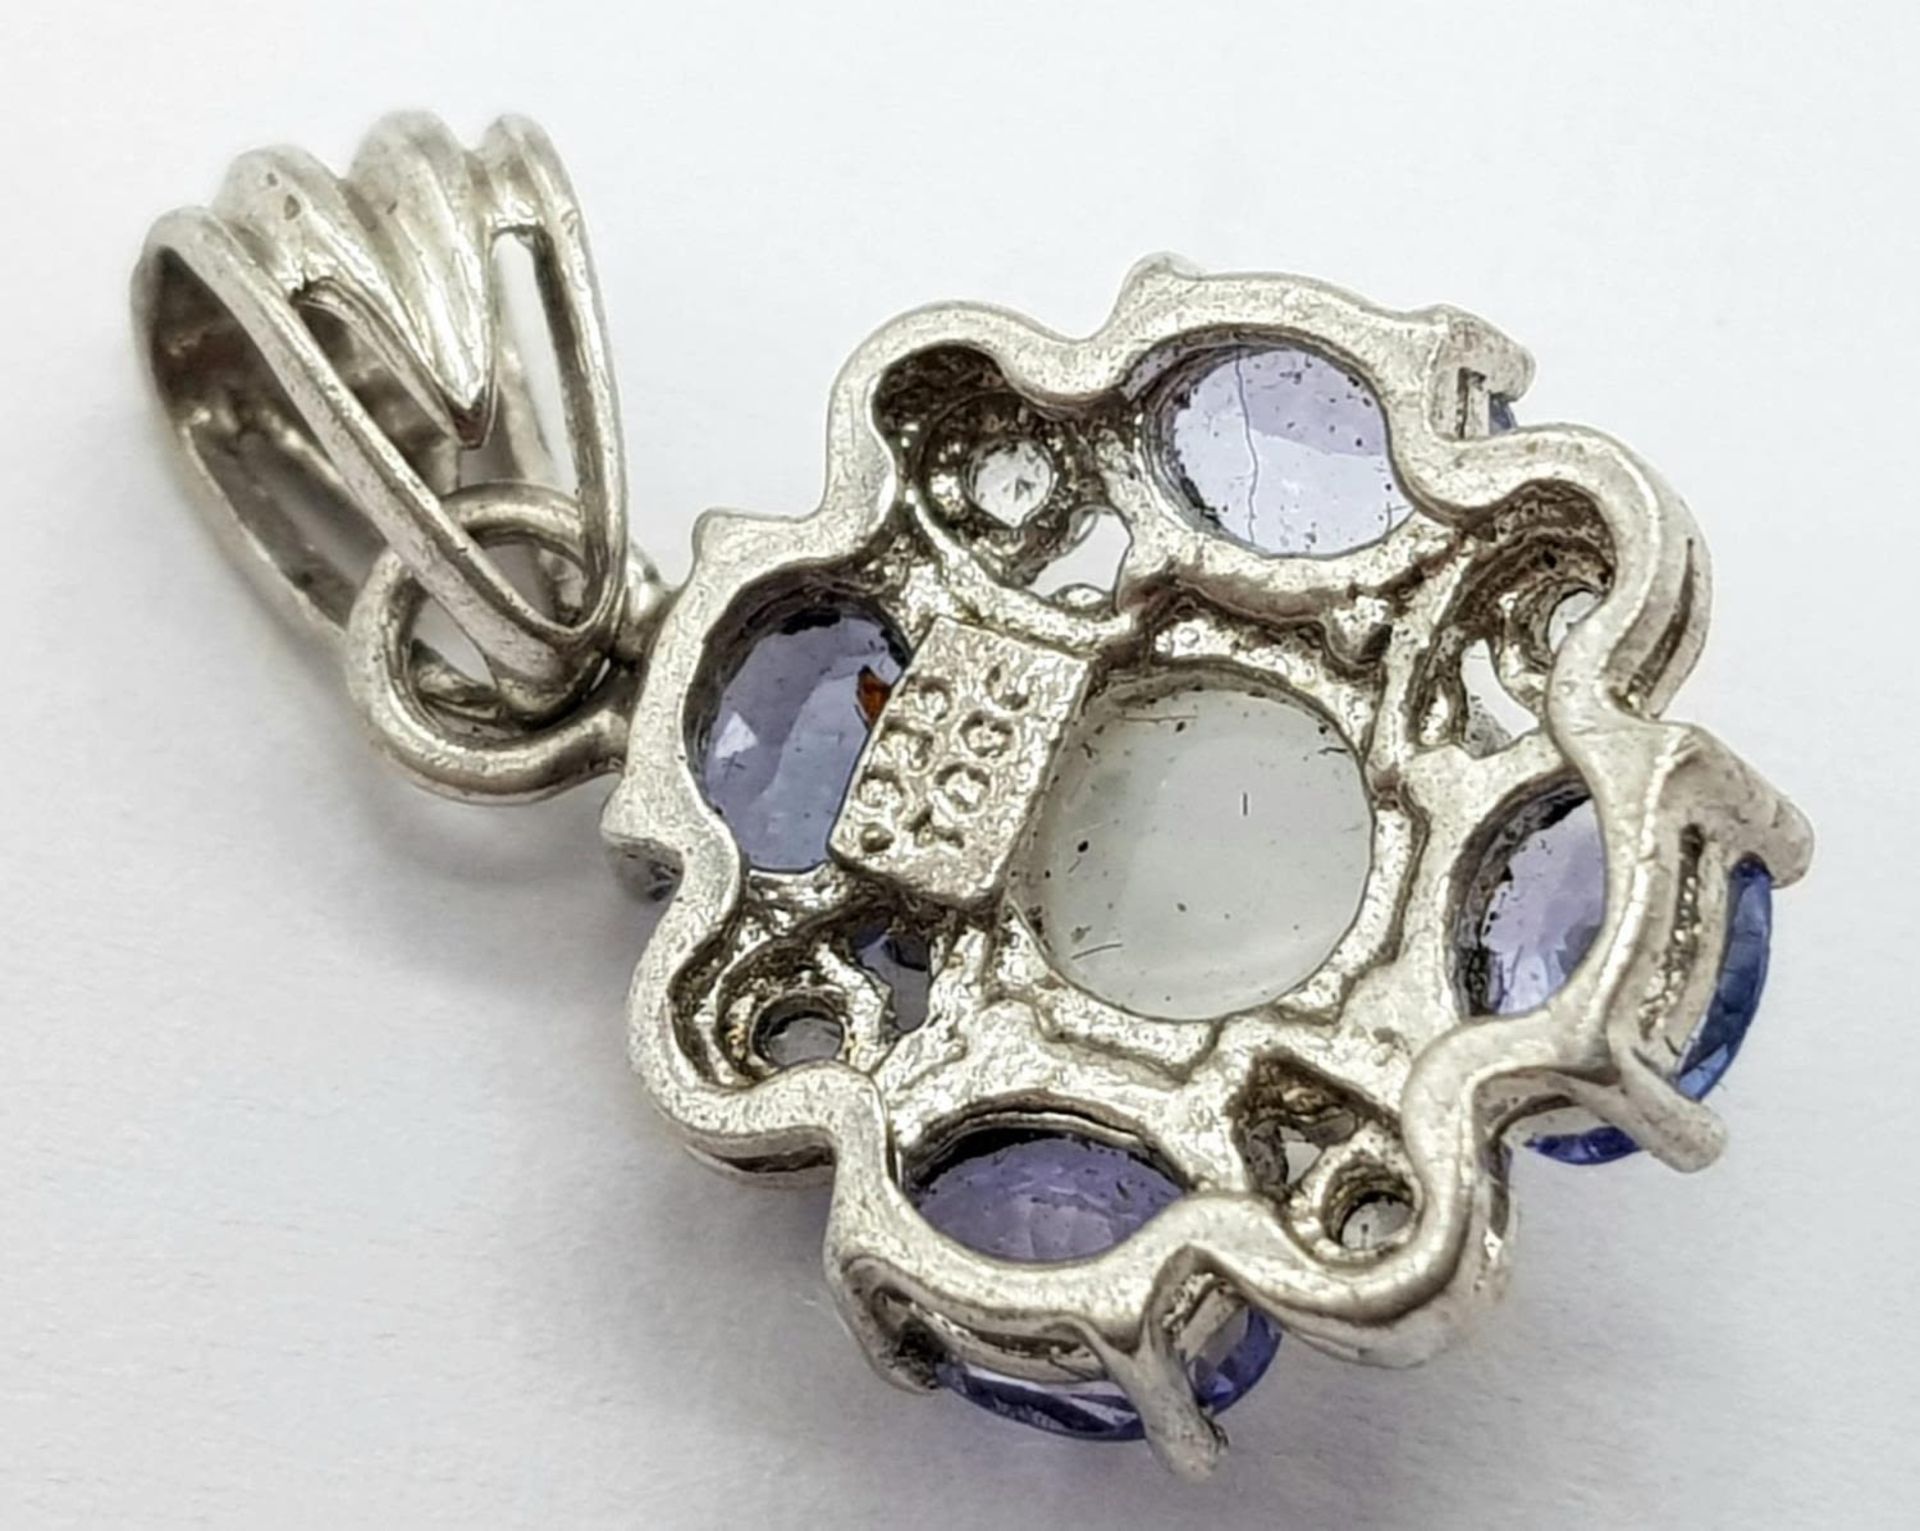 A Moonstone and Tanzanite Cluster Silver Pendant. 22mm. - Image 3 of 4